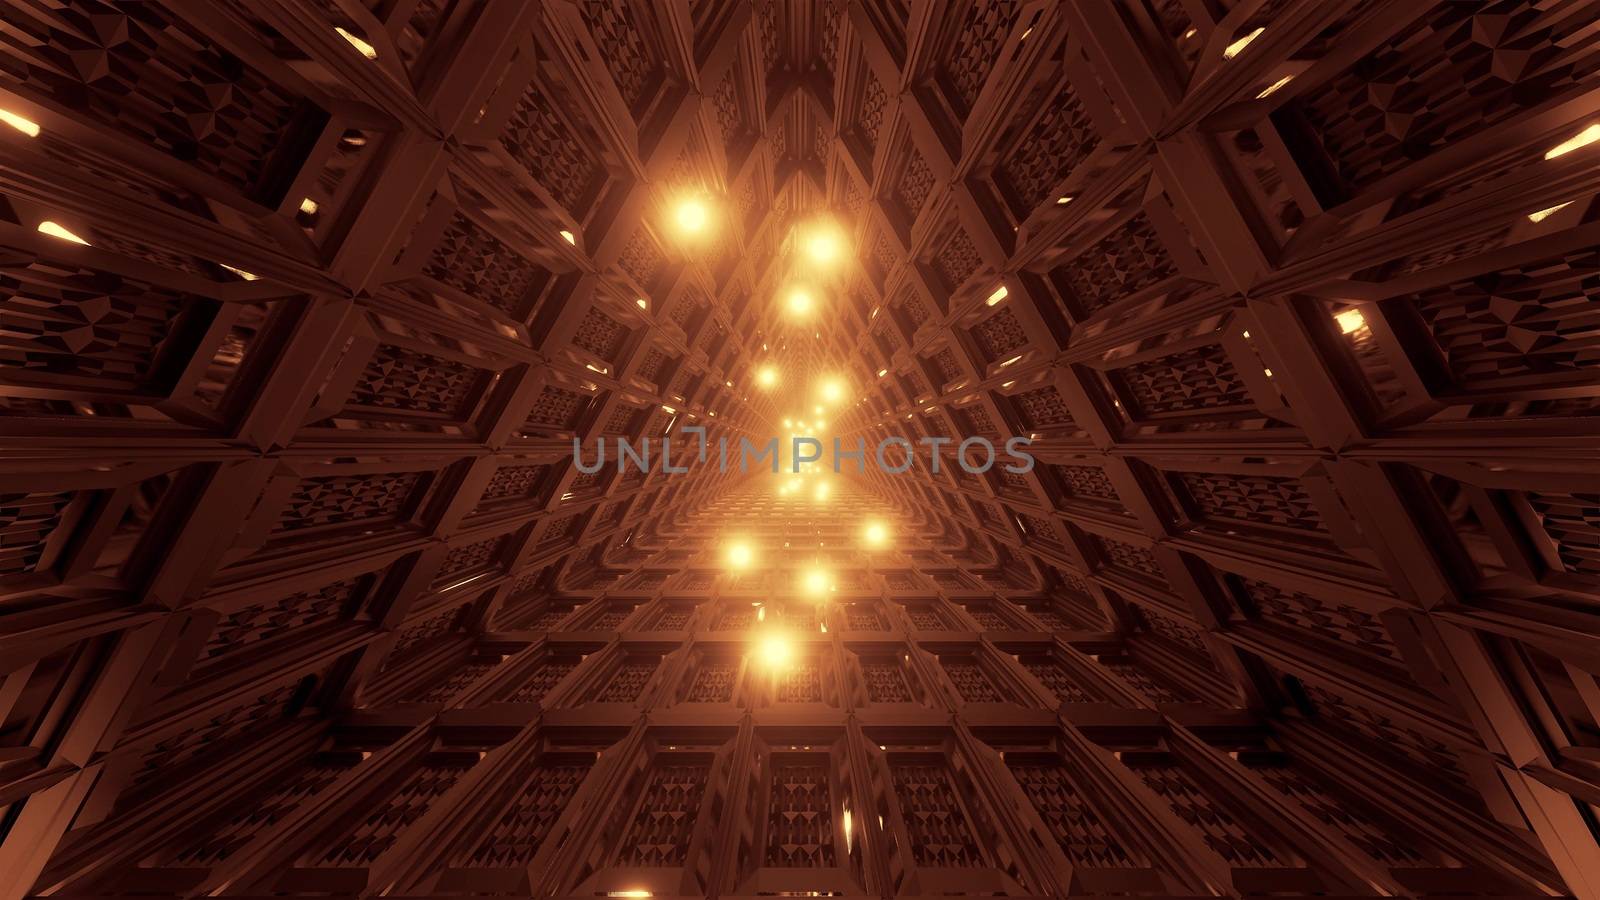 glowing spheres flying through triangle technical tunnel corridor 3d illustration backgrounds wallpaper graphics artworks by tunnelmotions